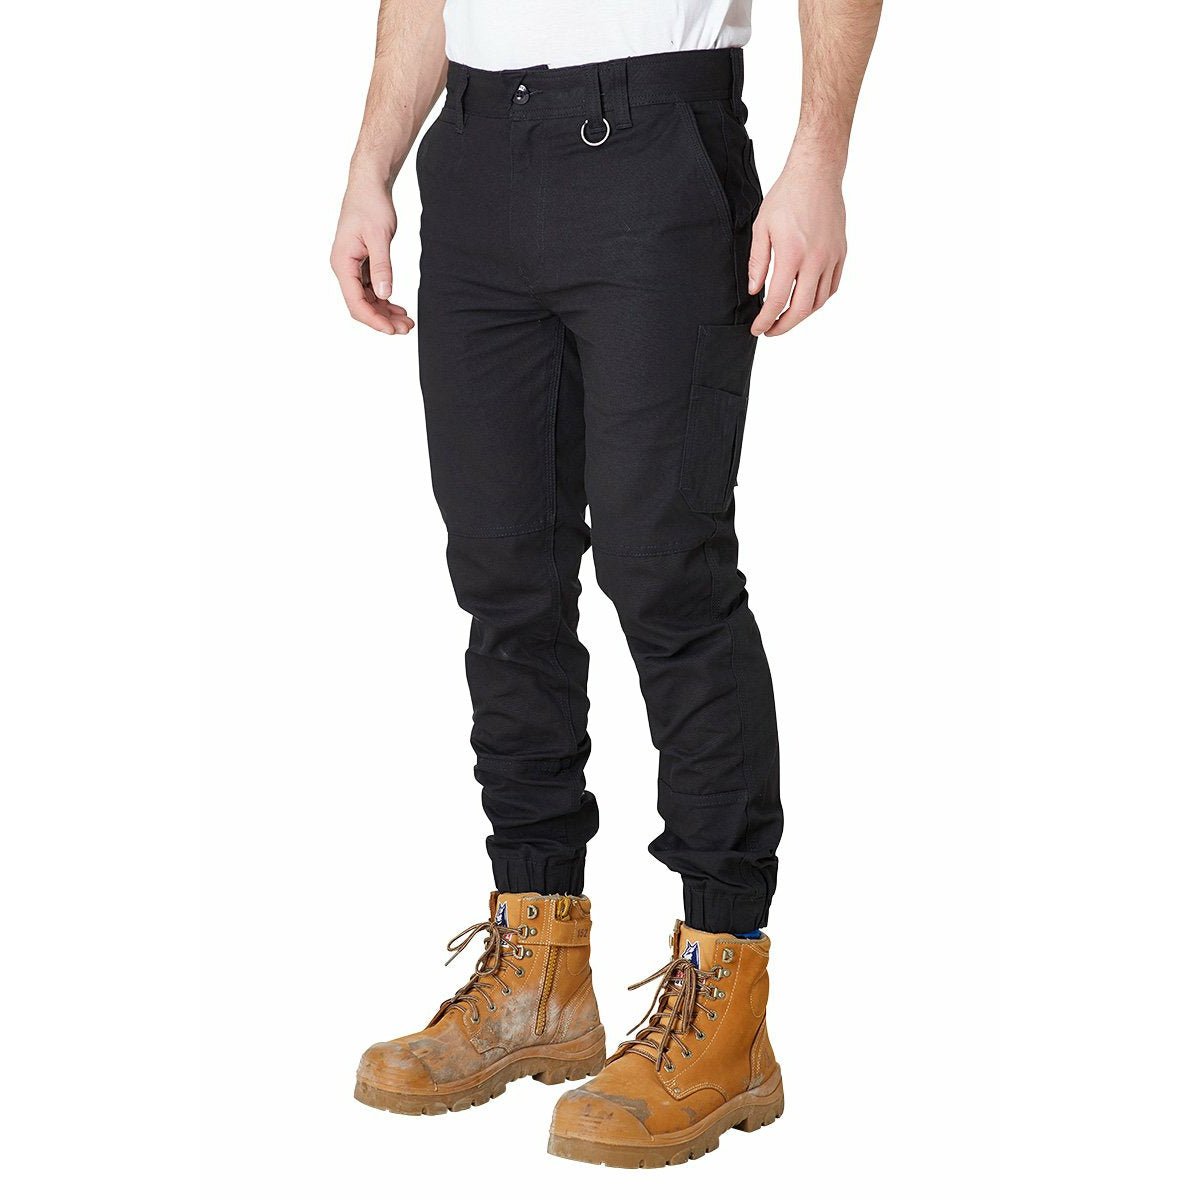 Cuffed Chinos Trousers  Buy Cuffed Chinos Trousers online in India